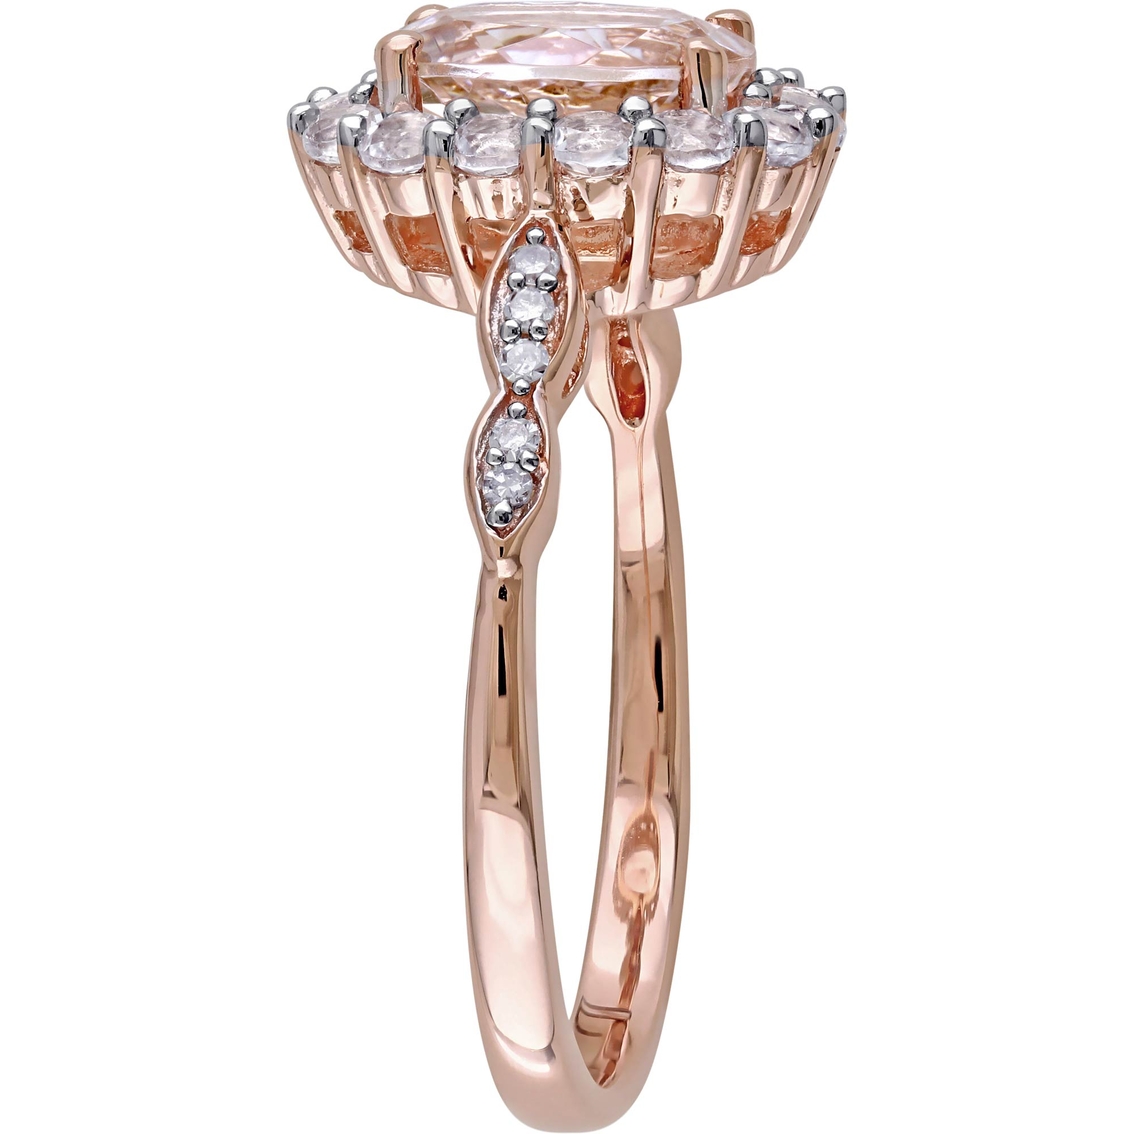 Sofia B. 14K Rose Gold Morganite, Topaz and Diamond Accent Vintage Ring - Image 2 of 3